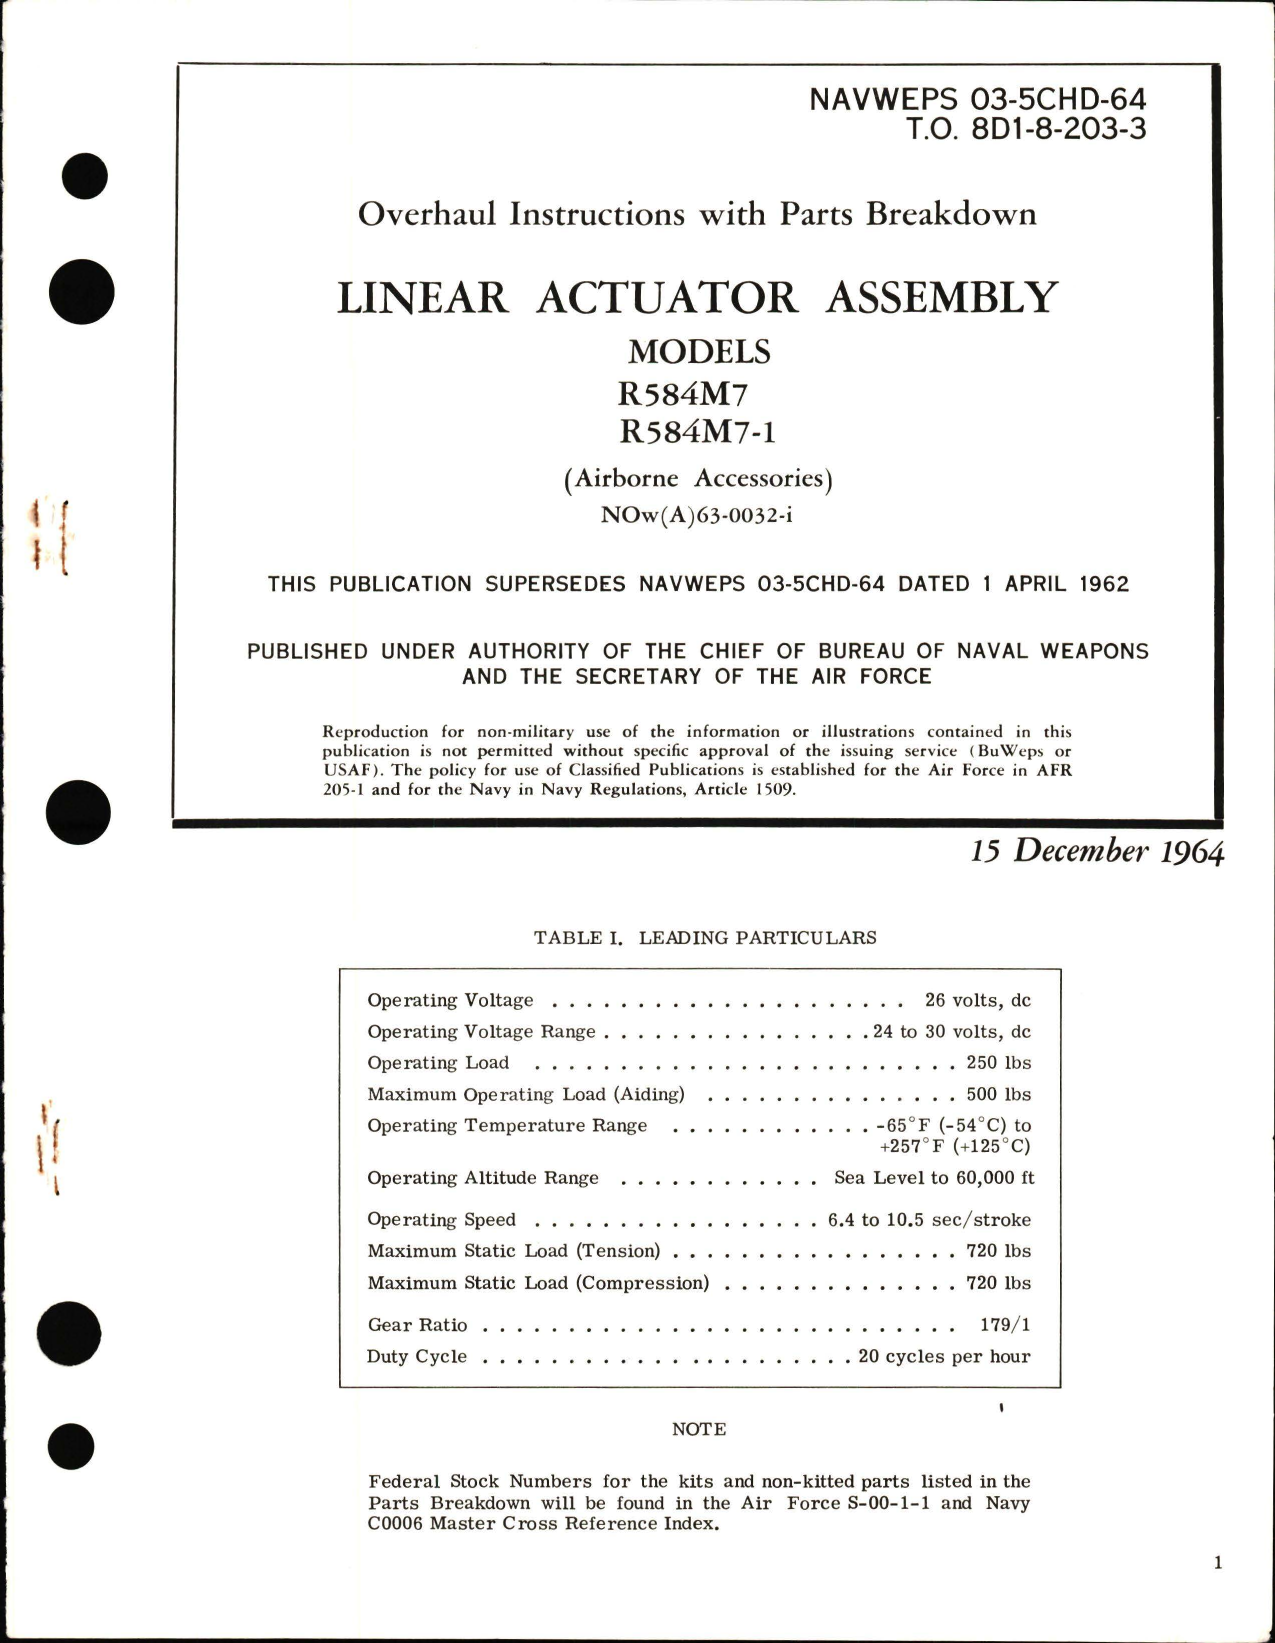 Sample page 1 from AirCorps Library document: Overhaul Instructions with Parts Breakdown for Linear Actuator Assembly R584M7 and R584M7-1 